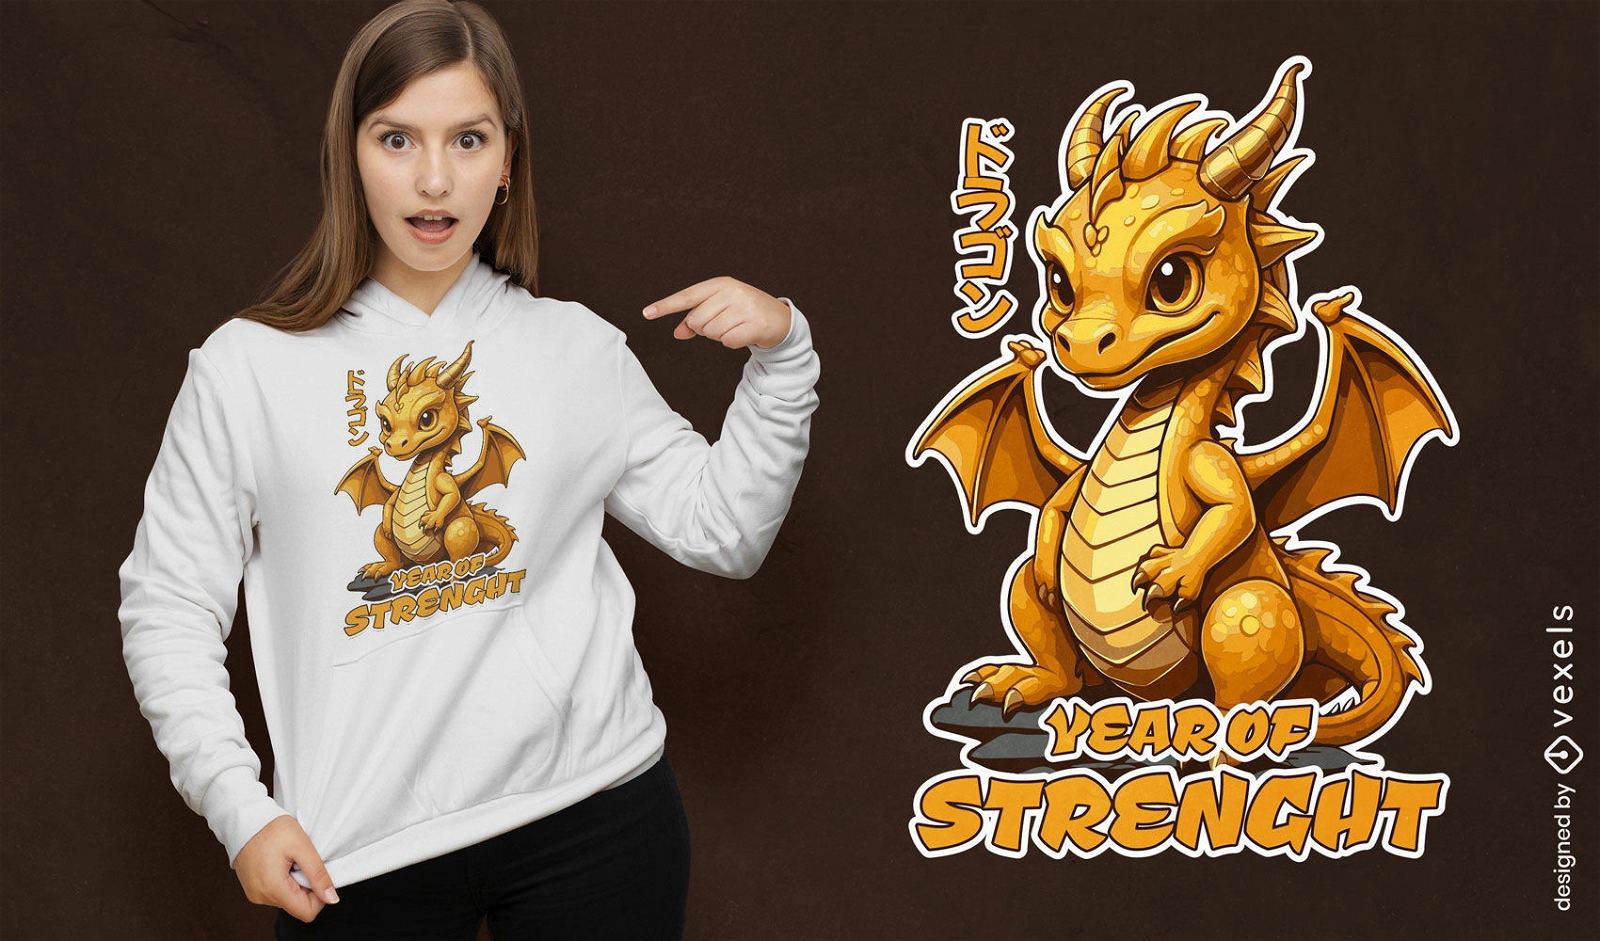 Year of the Dragon strength t-shirt design